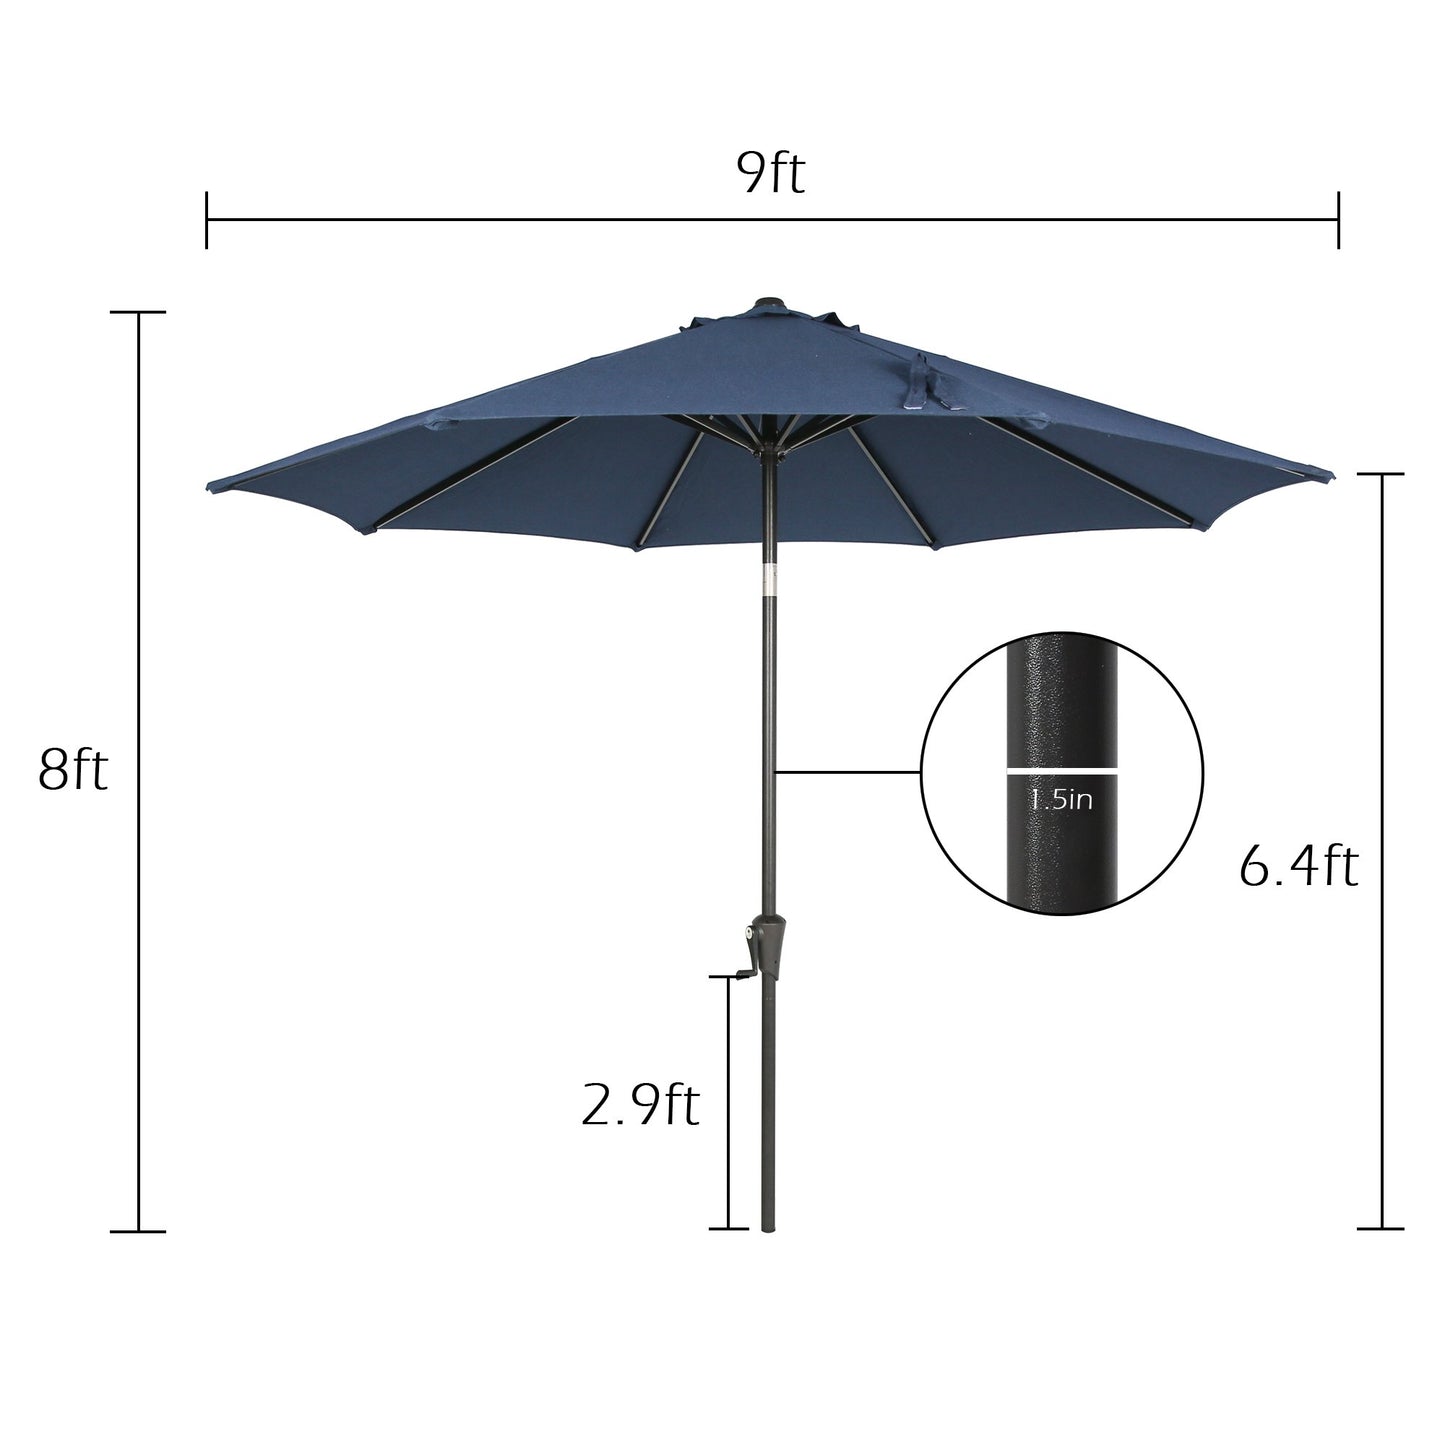 9 Ft Outdoor Tiltable Round Market Sunbrella Umbrella with Aluminum Pole and Crank, Canvas Navy(Stand Not Included)